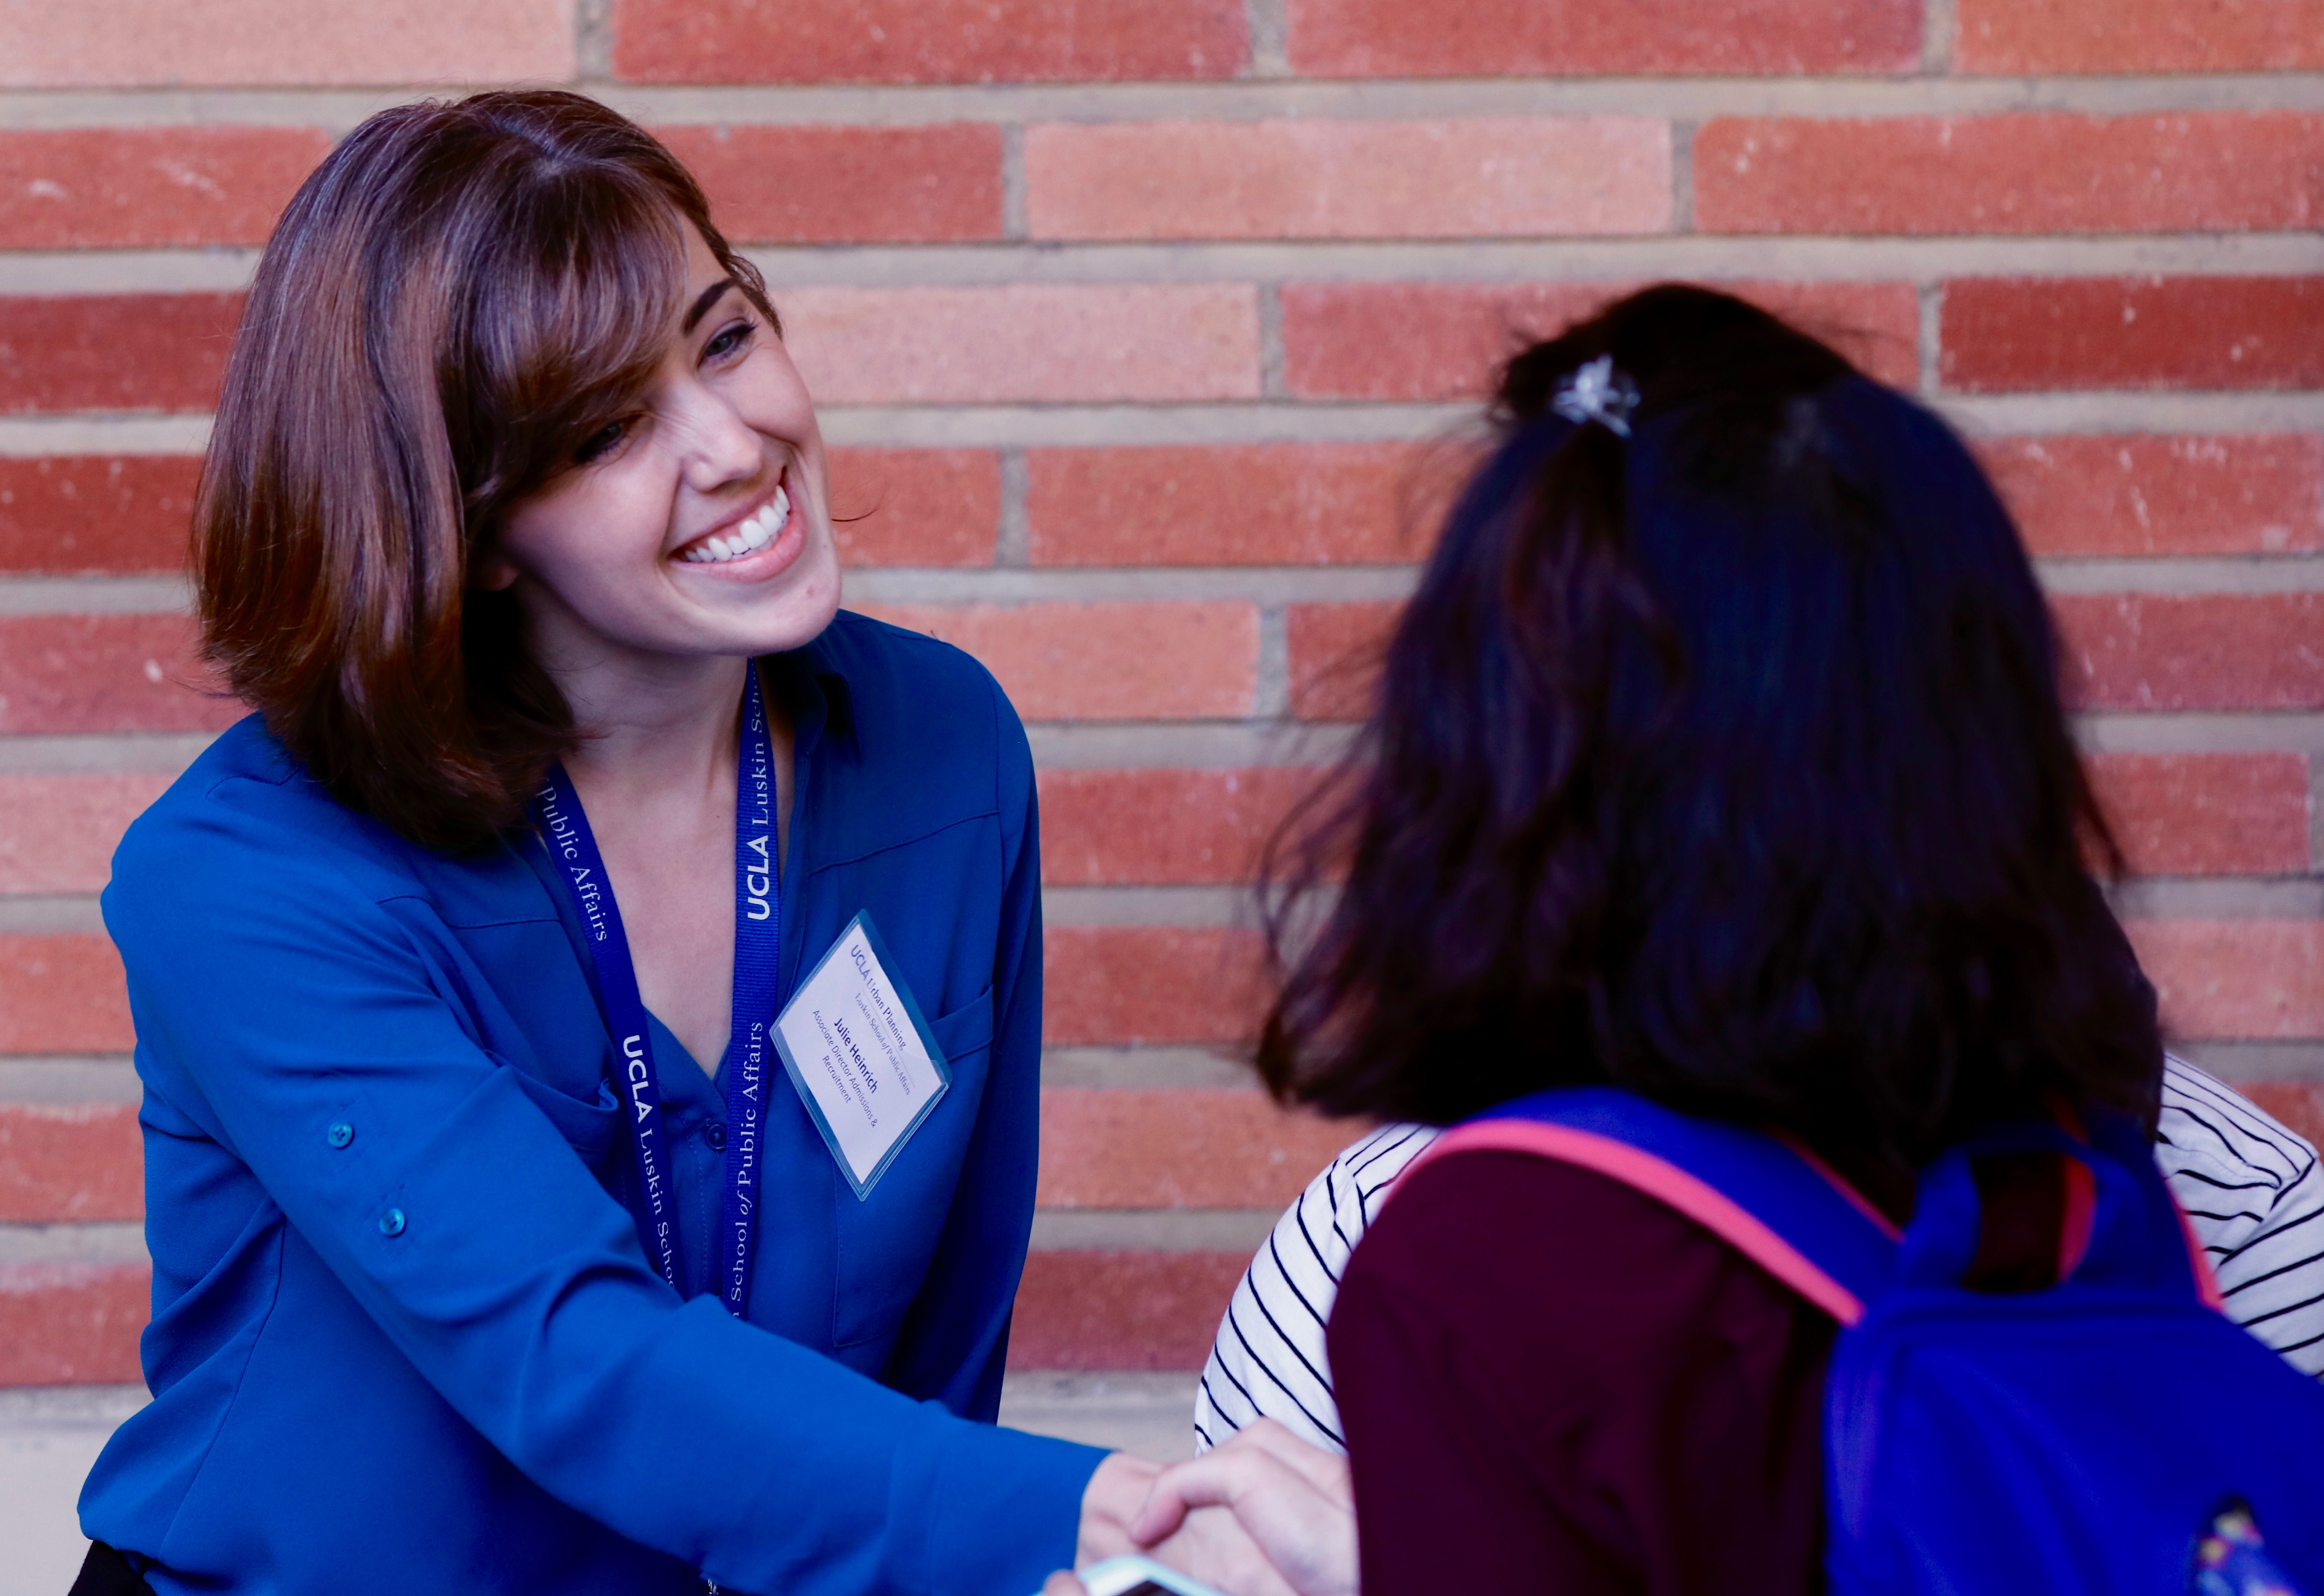 Julie Heinrich, associated director of admissions and recruitment in the Department of Urban Planning, greets a prospective student at Welcome Day. Photo by Les Dunseith